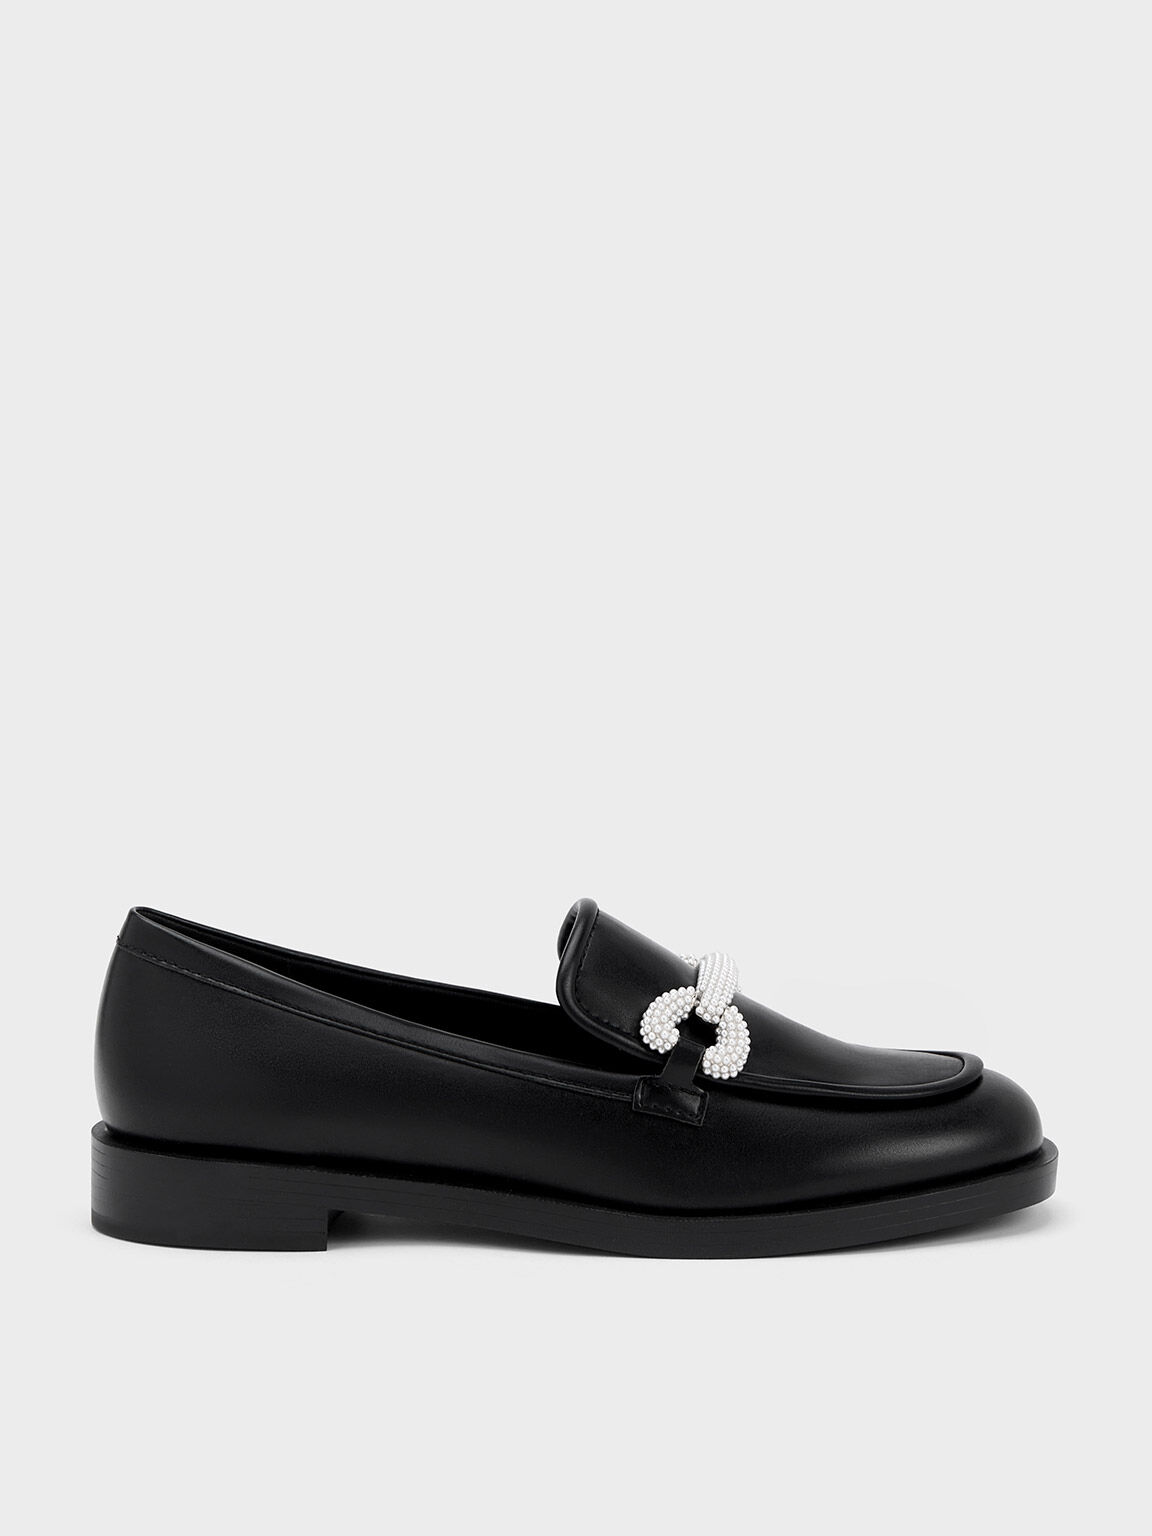 lava Uforenelig Køre ud Women's Flat Loafers | Shop Exclusive Styles | CHARLES & KEITH HK